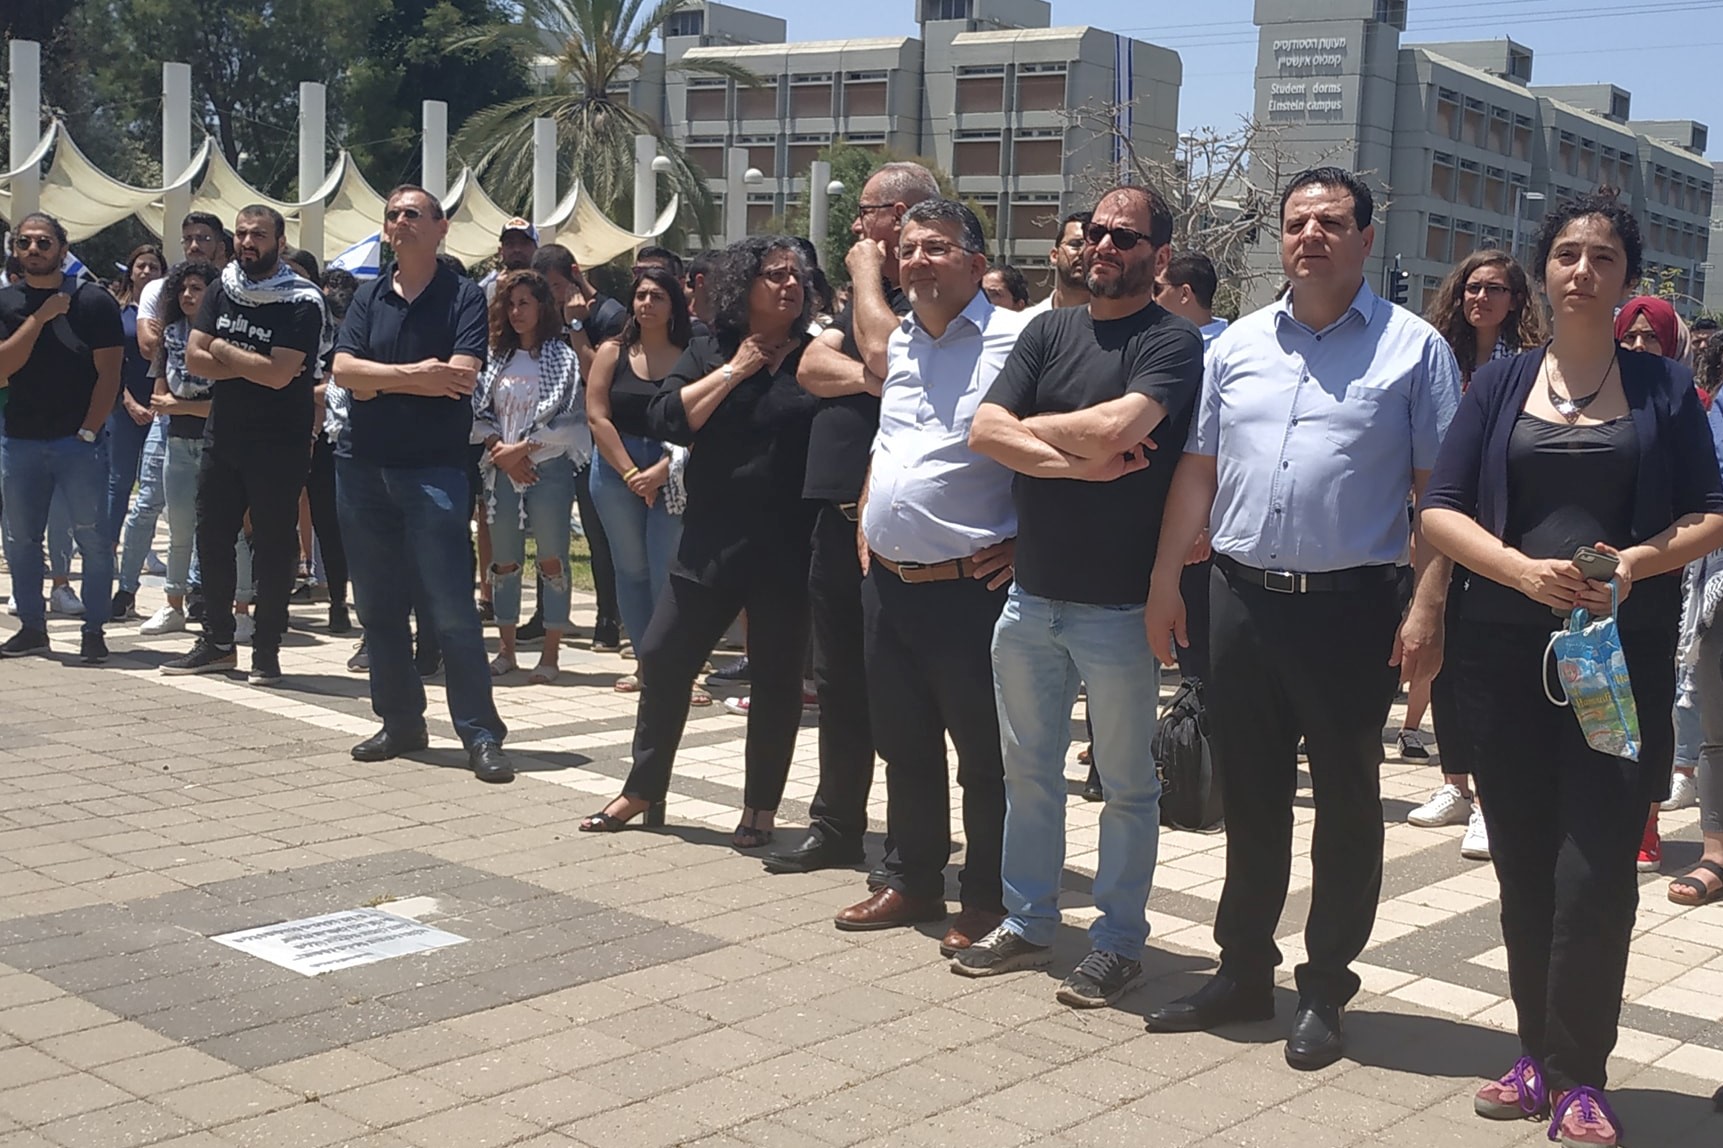 Nakba Day commemoration ceremony held last Wednesday, May 15, at the main entrance to Tel Aviv University. Participating in the event were all four current Hadash MKs: Ayman Odeh, Aida Touma-Sliman, Ofer Cassif and Youssef Jabareen, as well as former Hadash MKs Mohammed Barakeh and Dov Khenin.